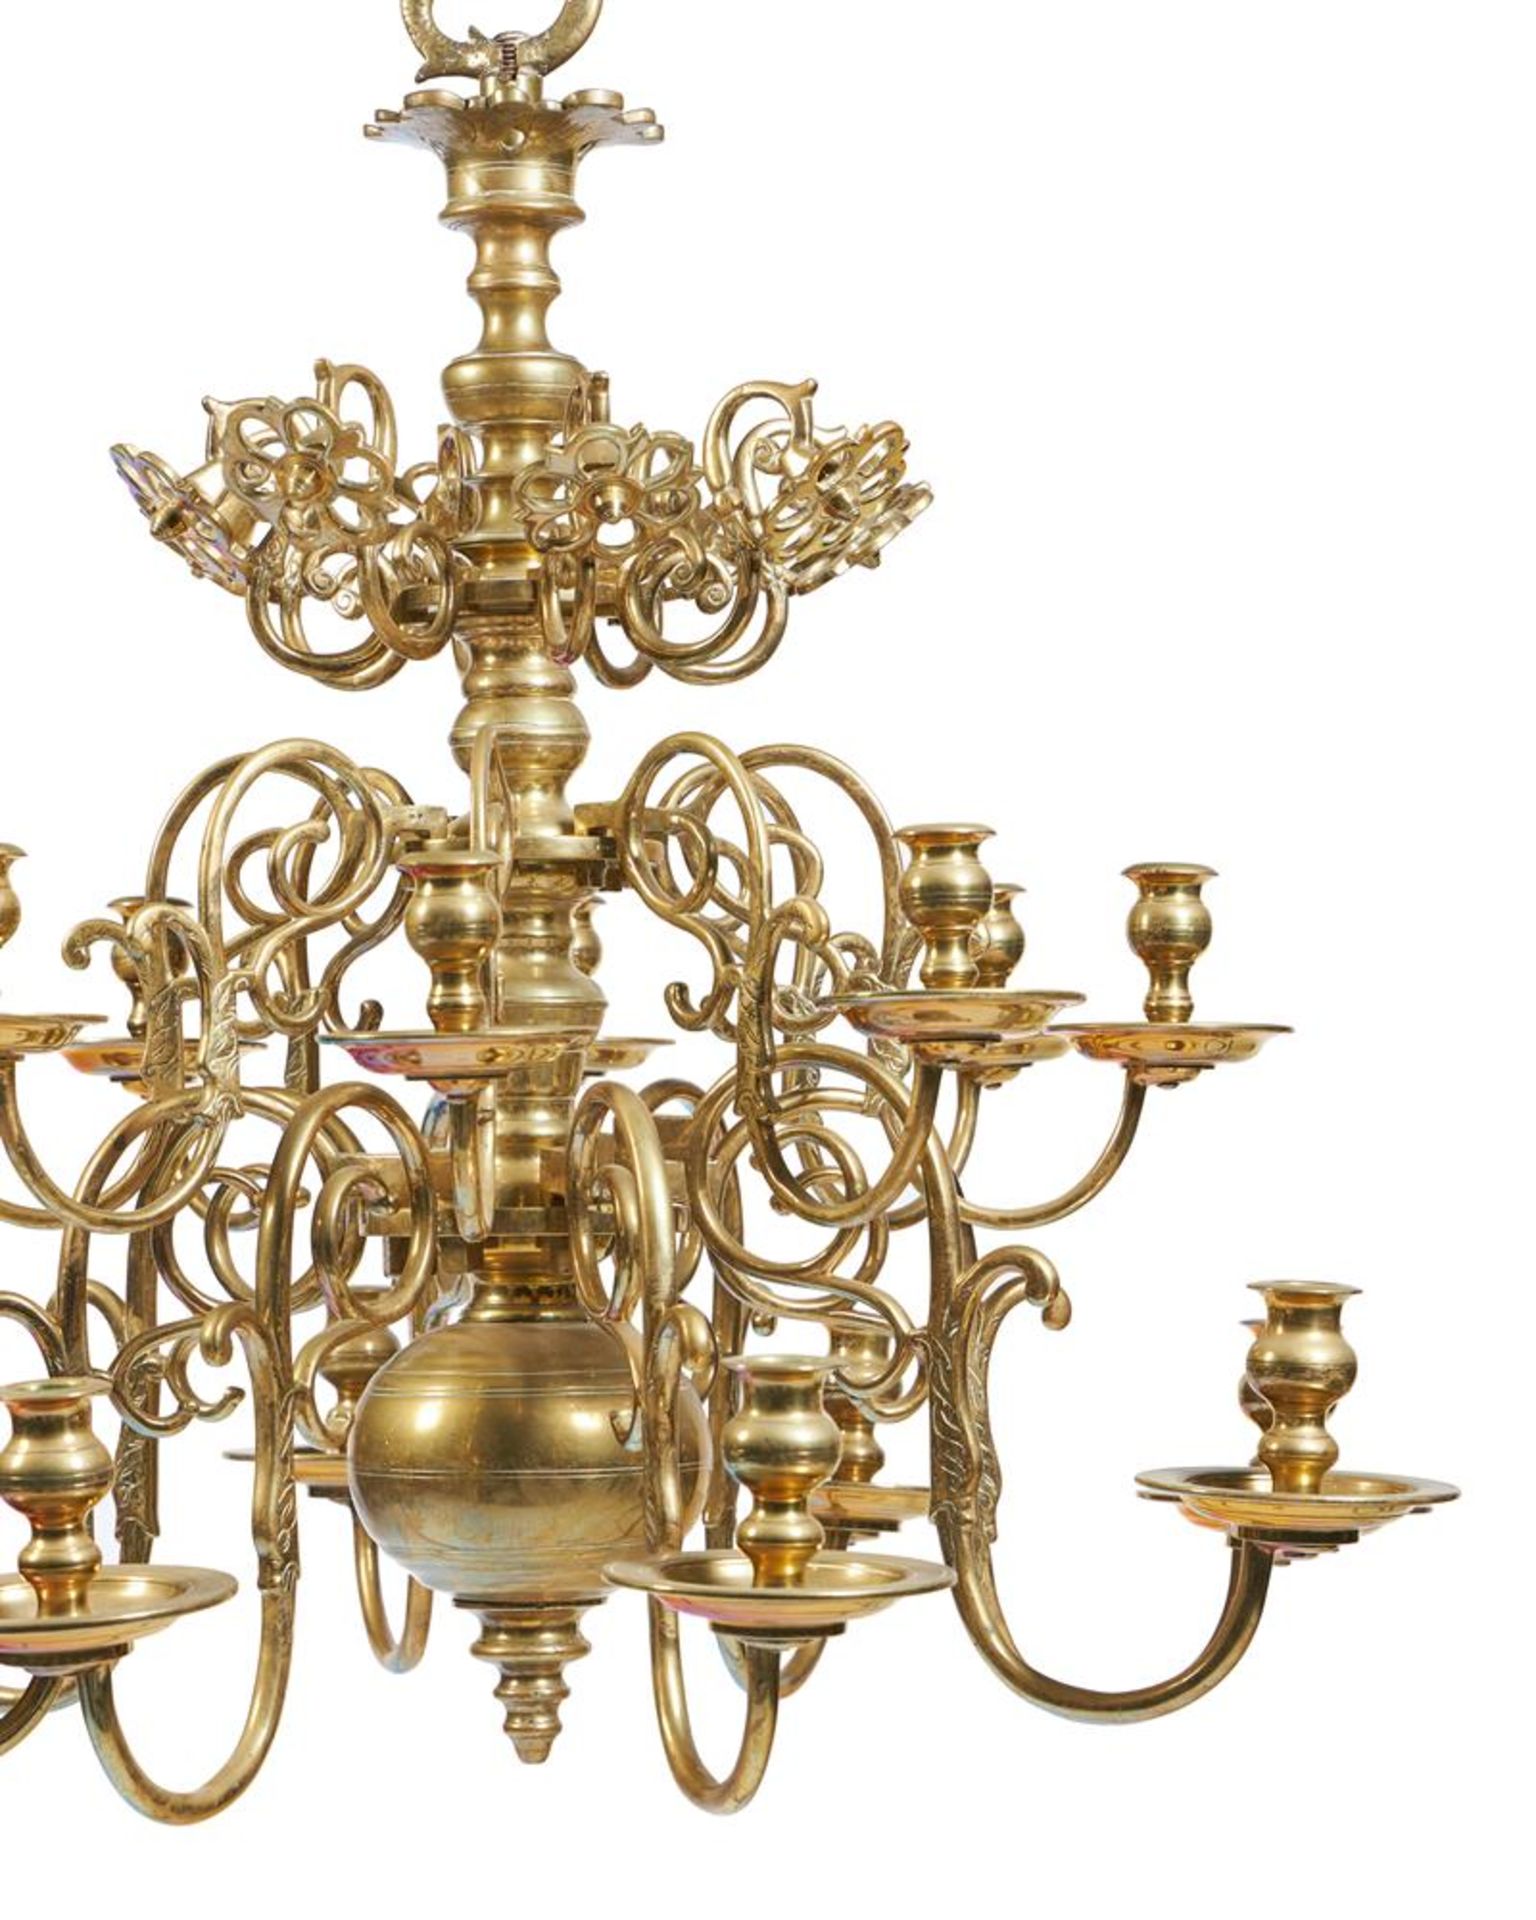 AN ANGLO-DUTCH GILT BRASS SIXTEEN LIGHT CHANDELIER, 18TH/19TH CENTURY - Image 3 of 4